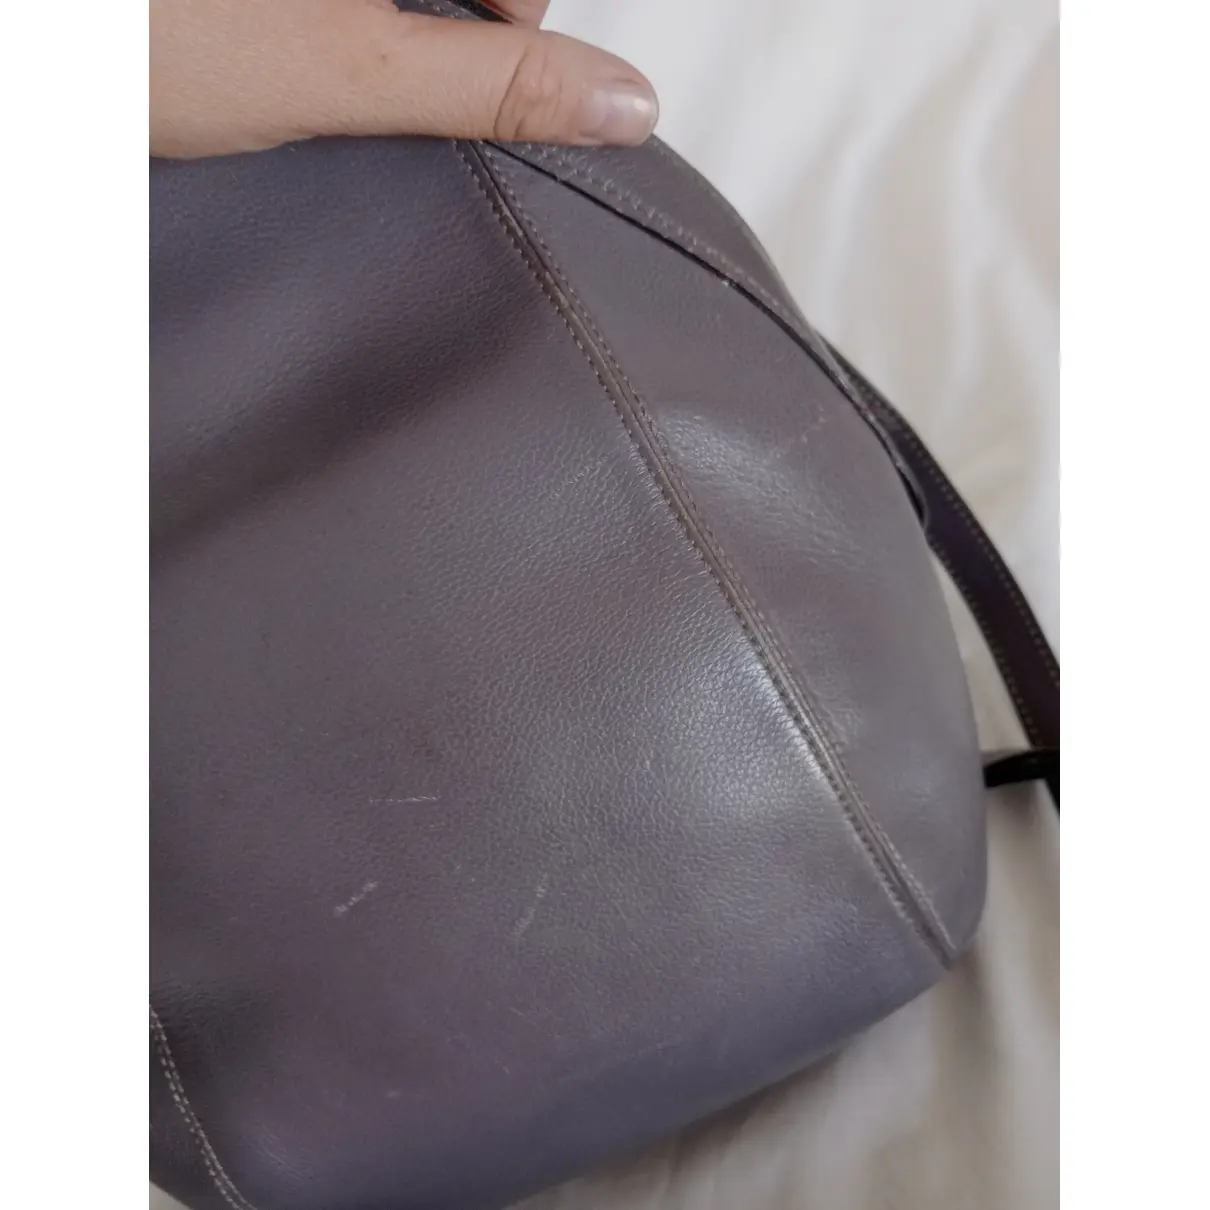 Leather backpack Delvaux